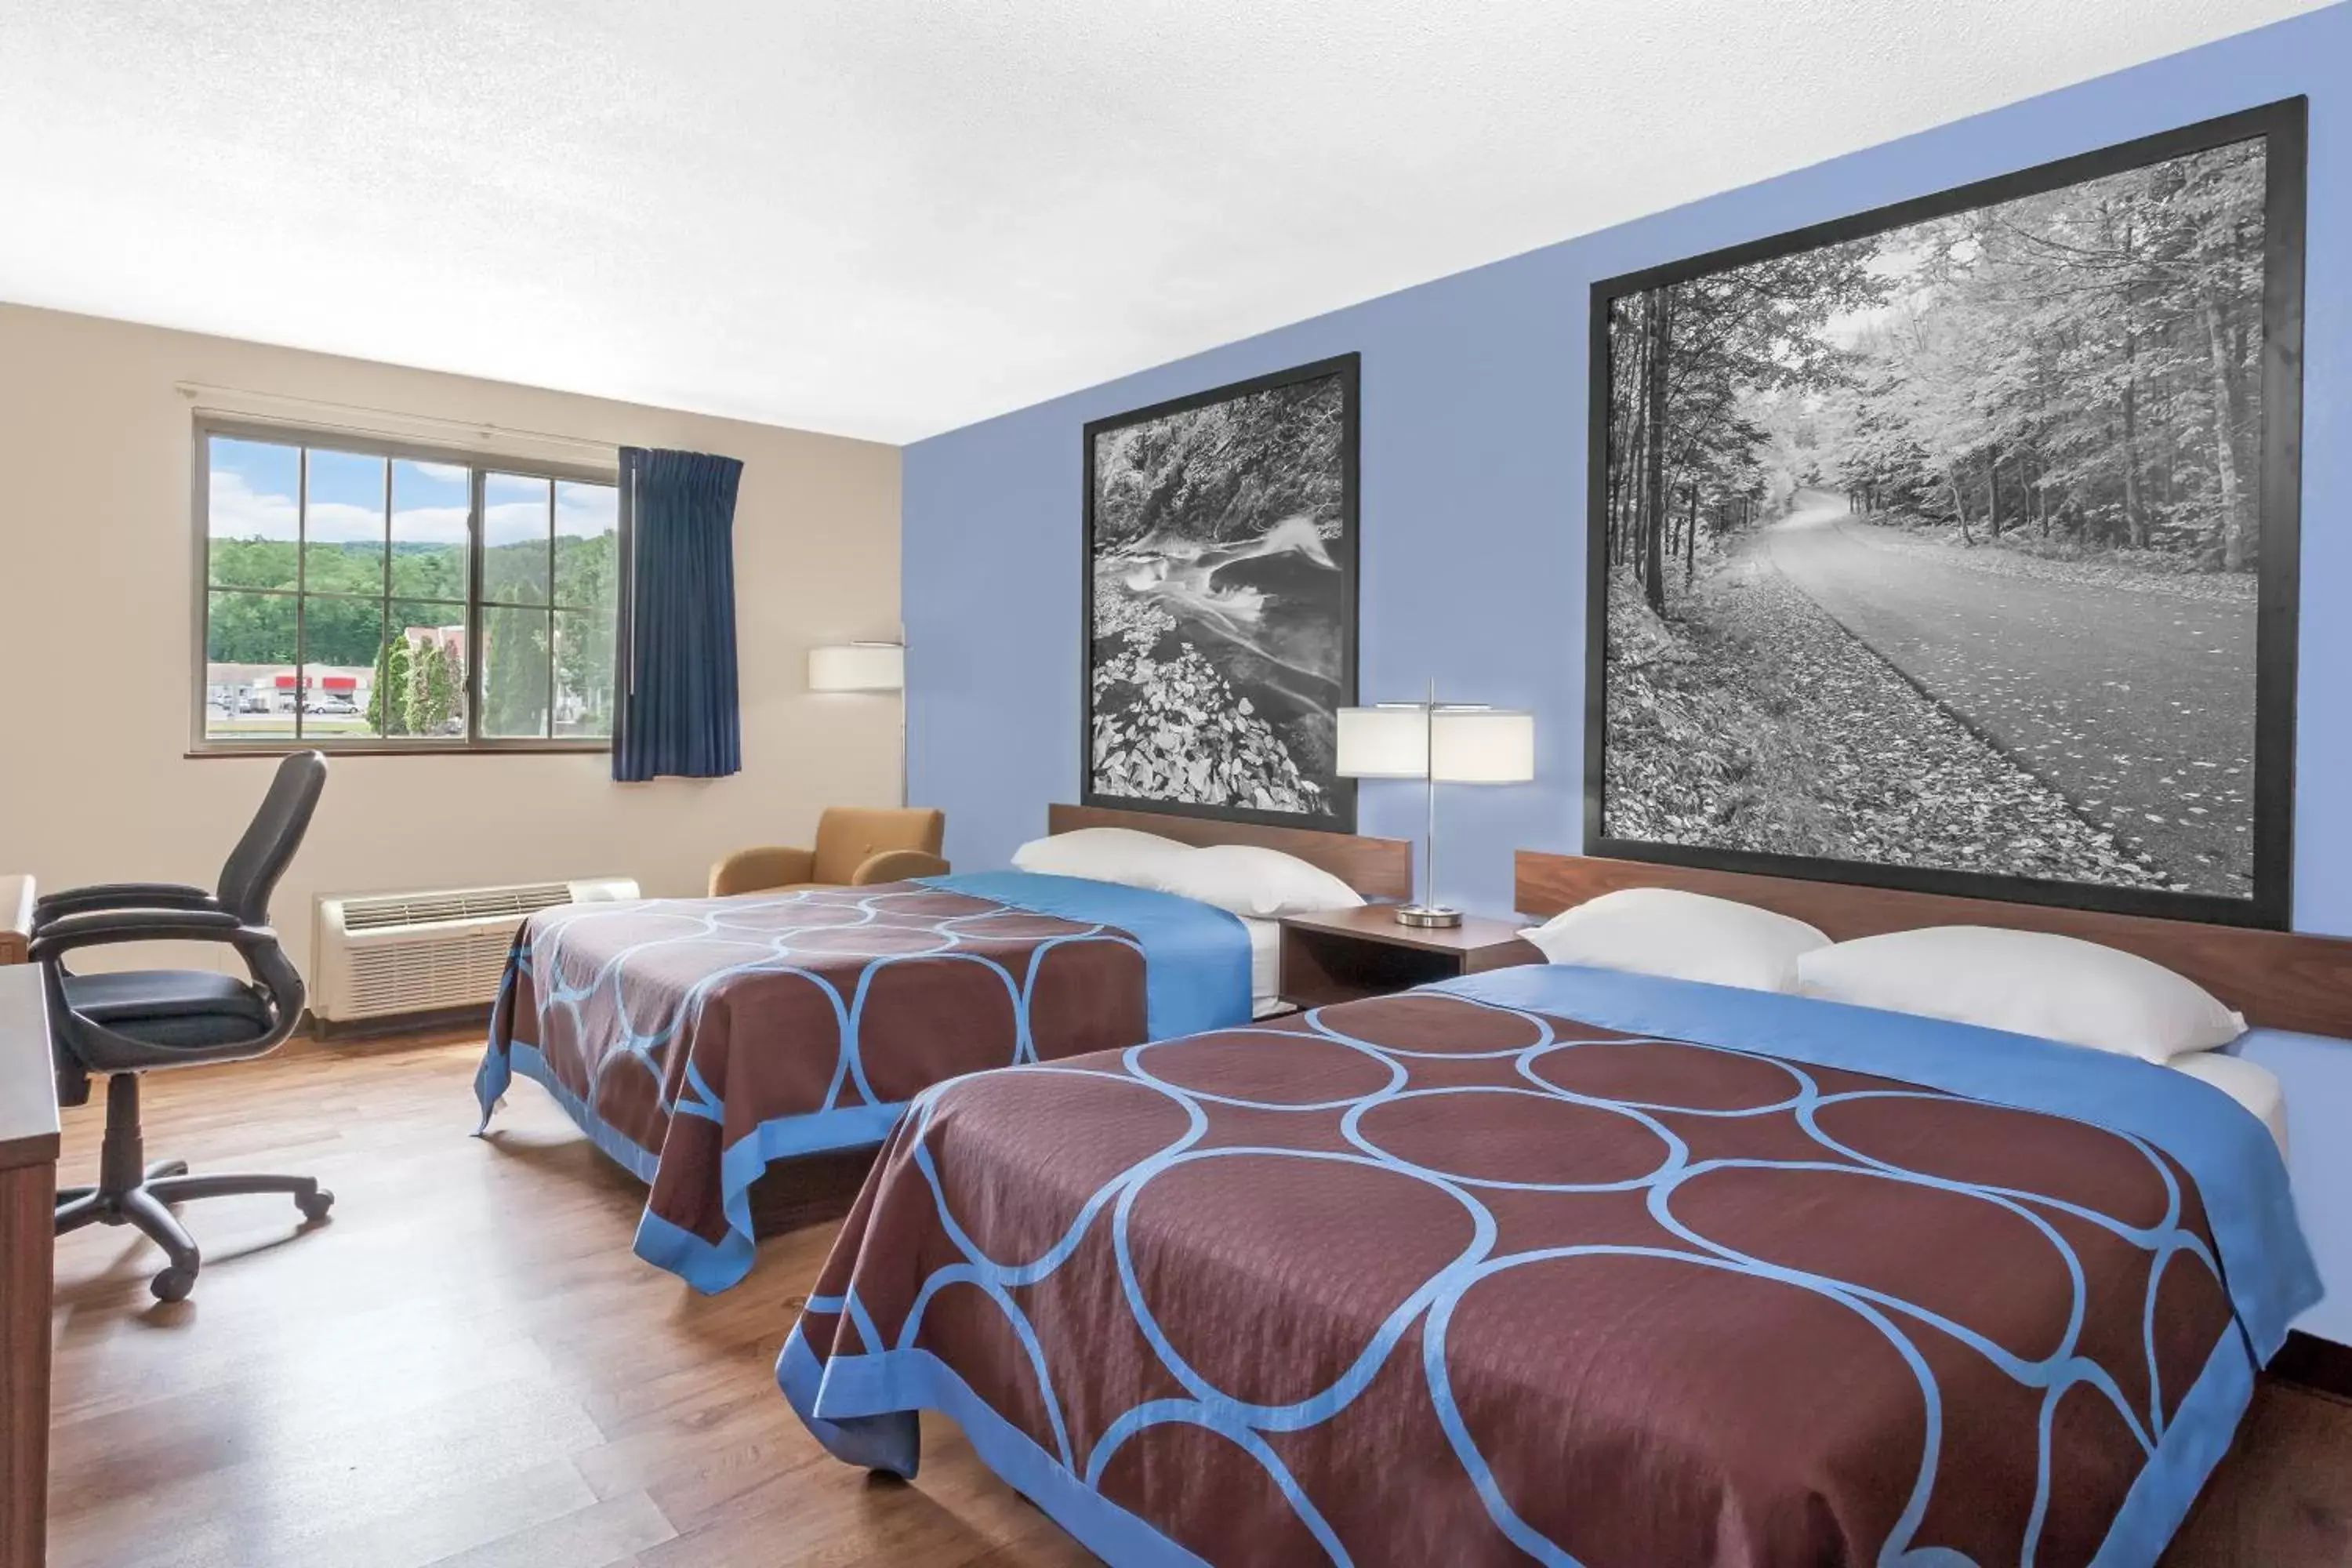 Bed, Room Photo in Super 8 by Wyndham Oneonta/Cooperstown